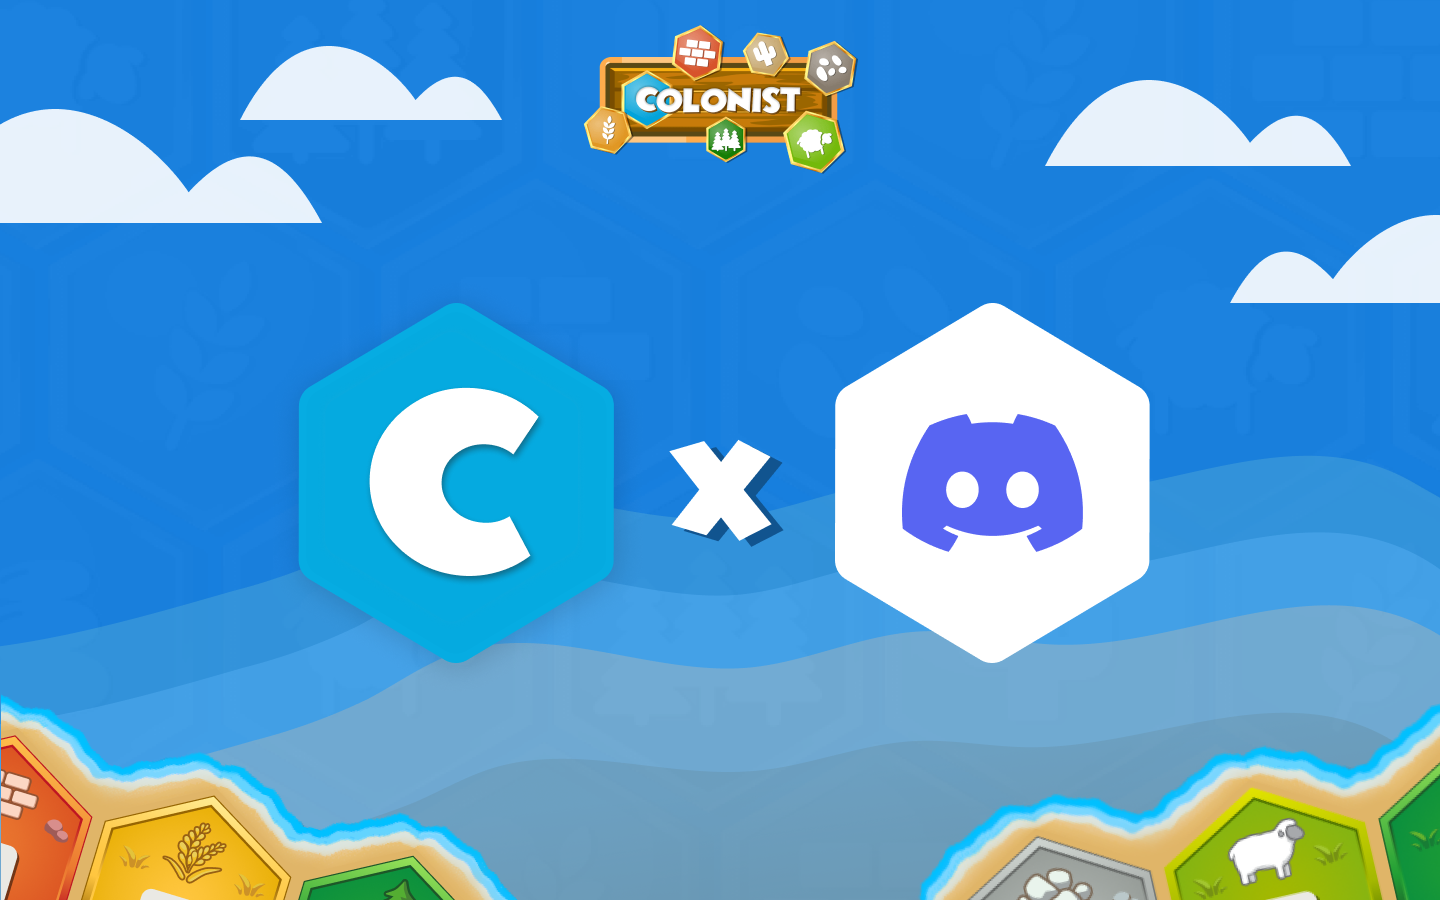 Play Colonist on Discord!              
A Step-by-Step Guide